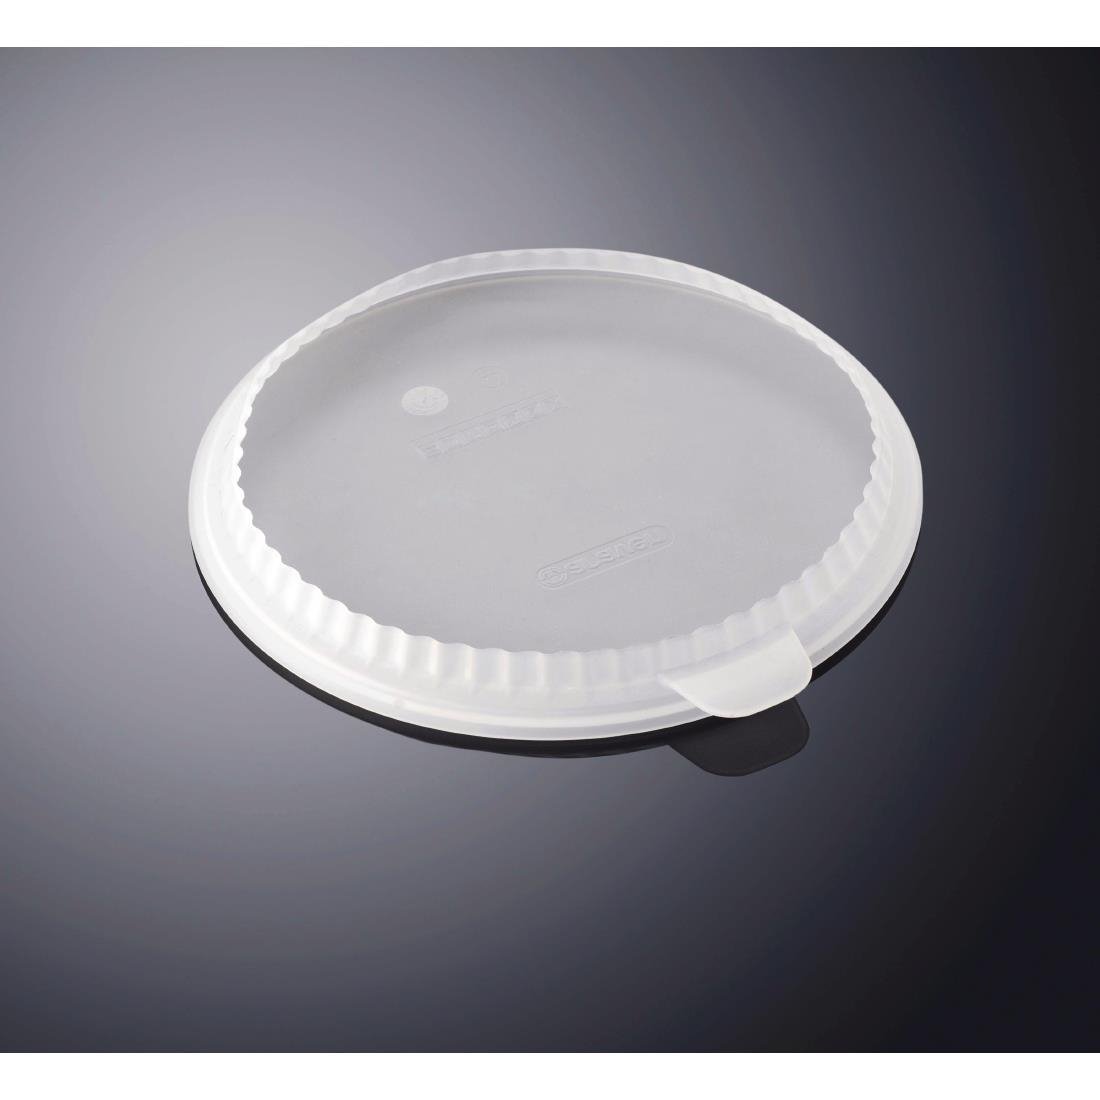 FP931 Araven Round Silicone Lid Clear 235mm JD Catering Equipment Solutions Ltd